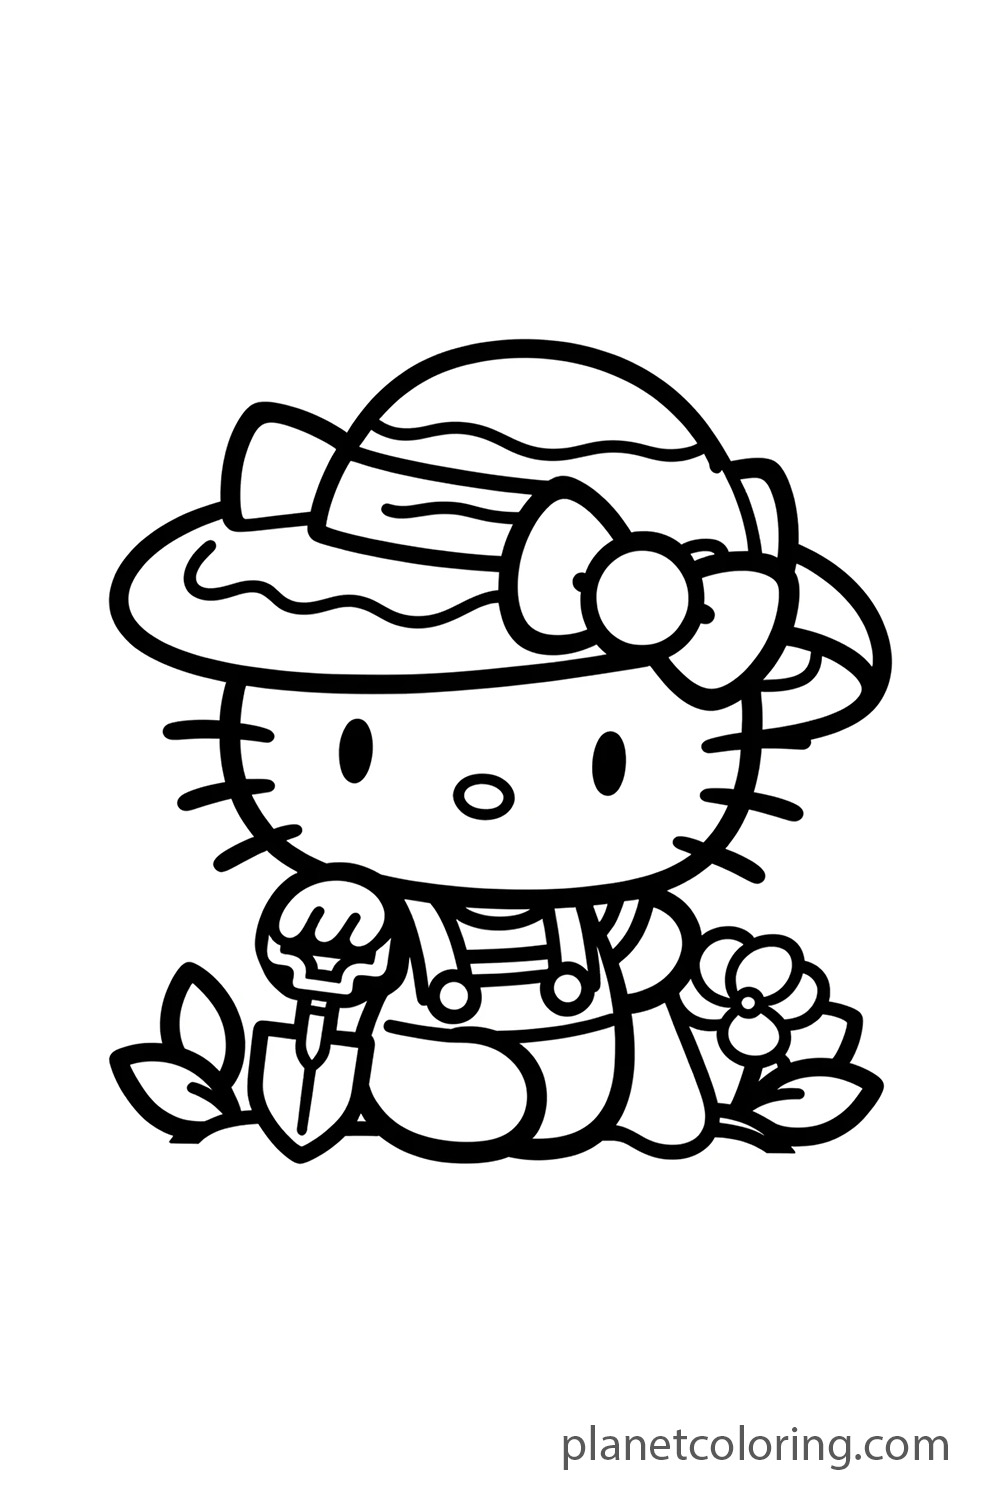 Hello kitty with a hat and shovel